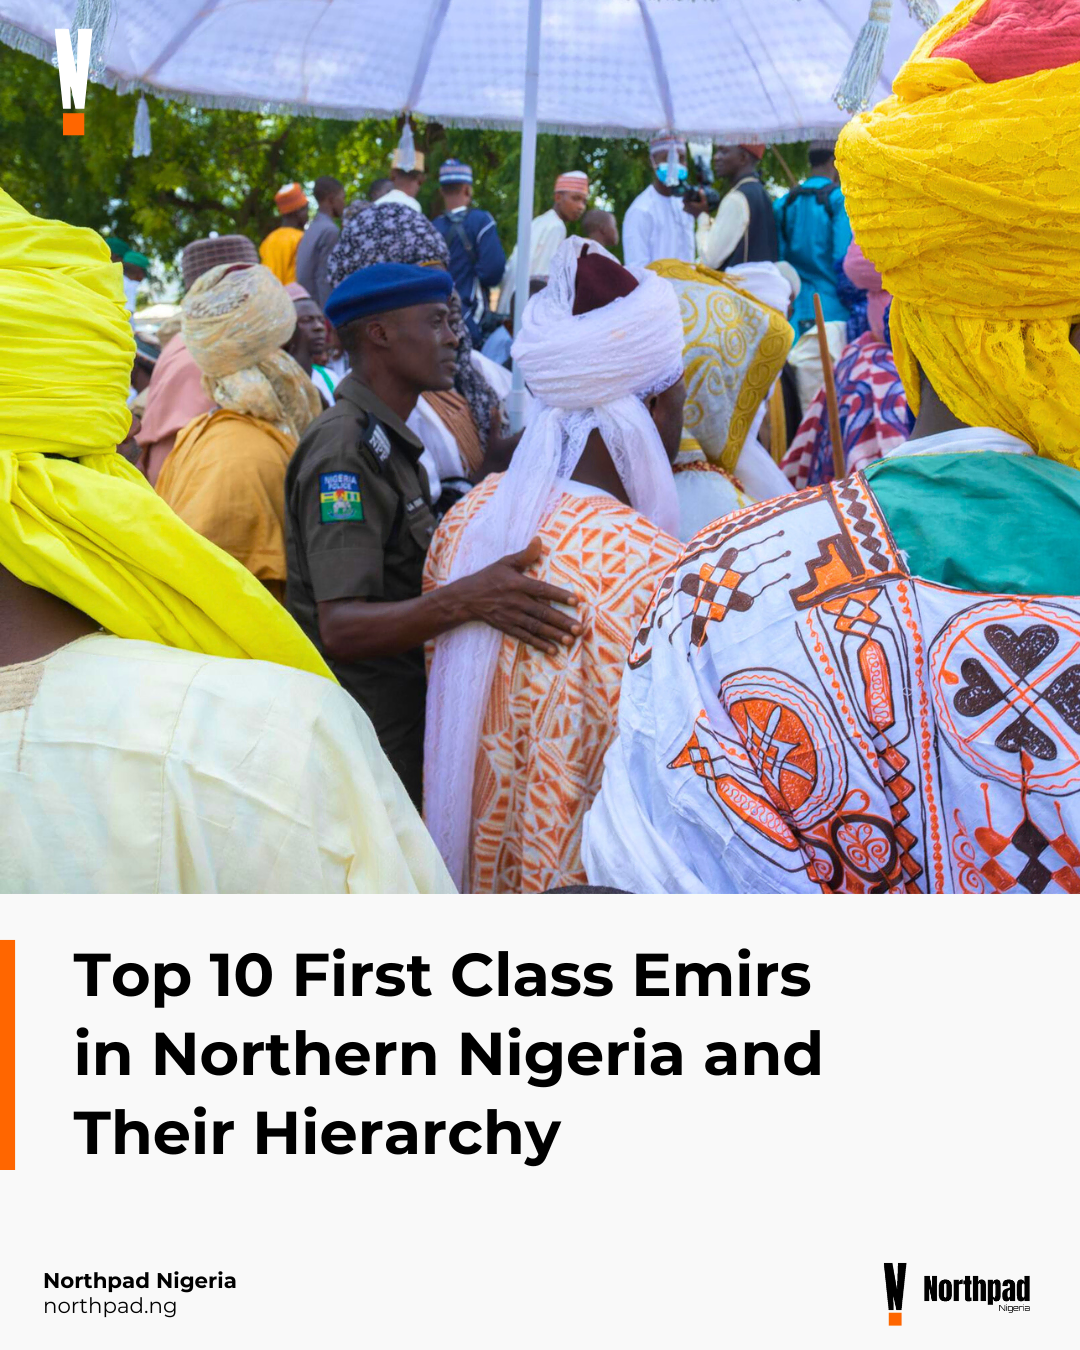 Top 10 First Class Emirs in Northern Nigeria and Their Hierarchy